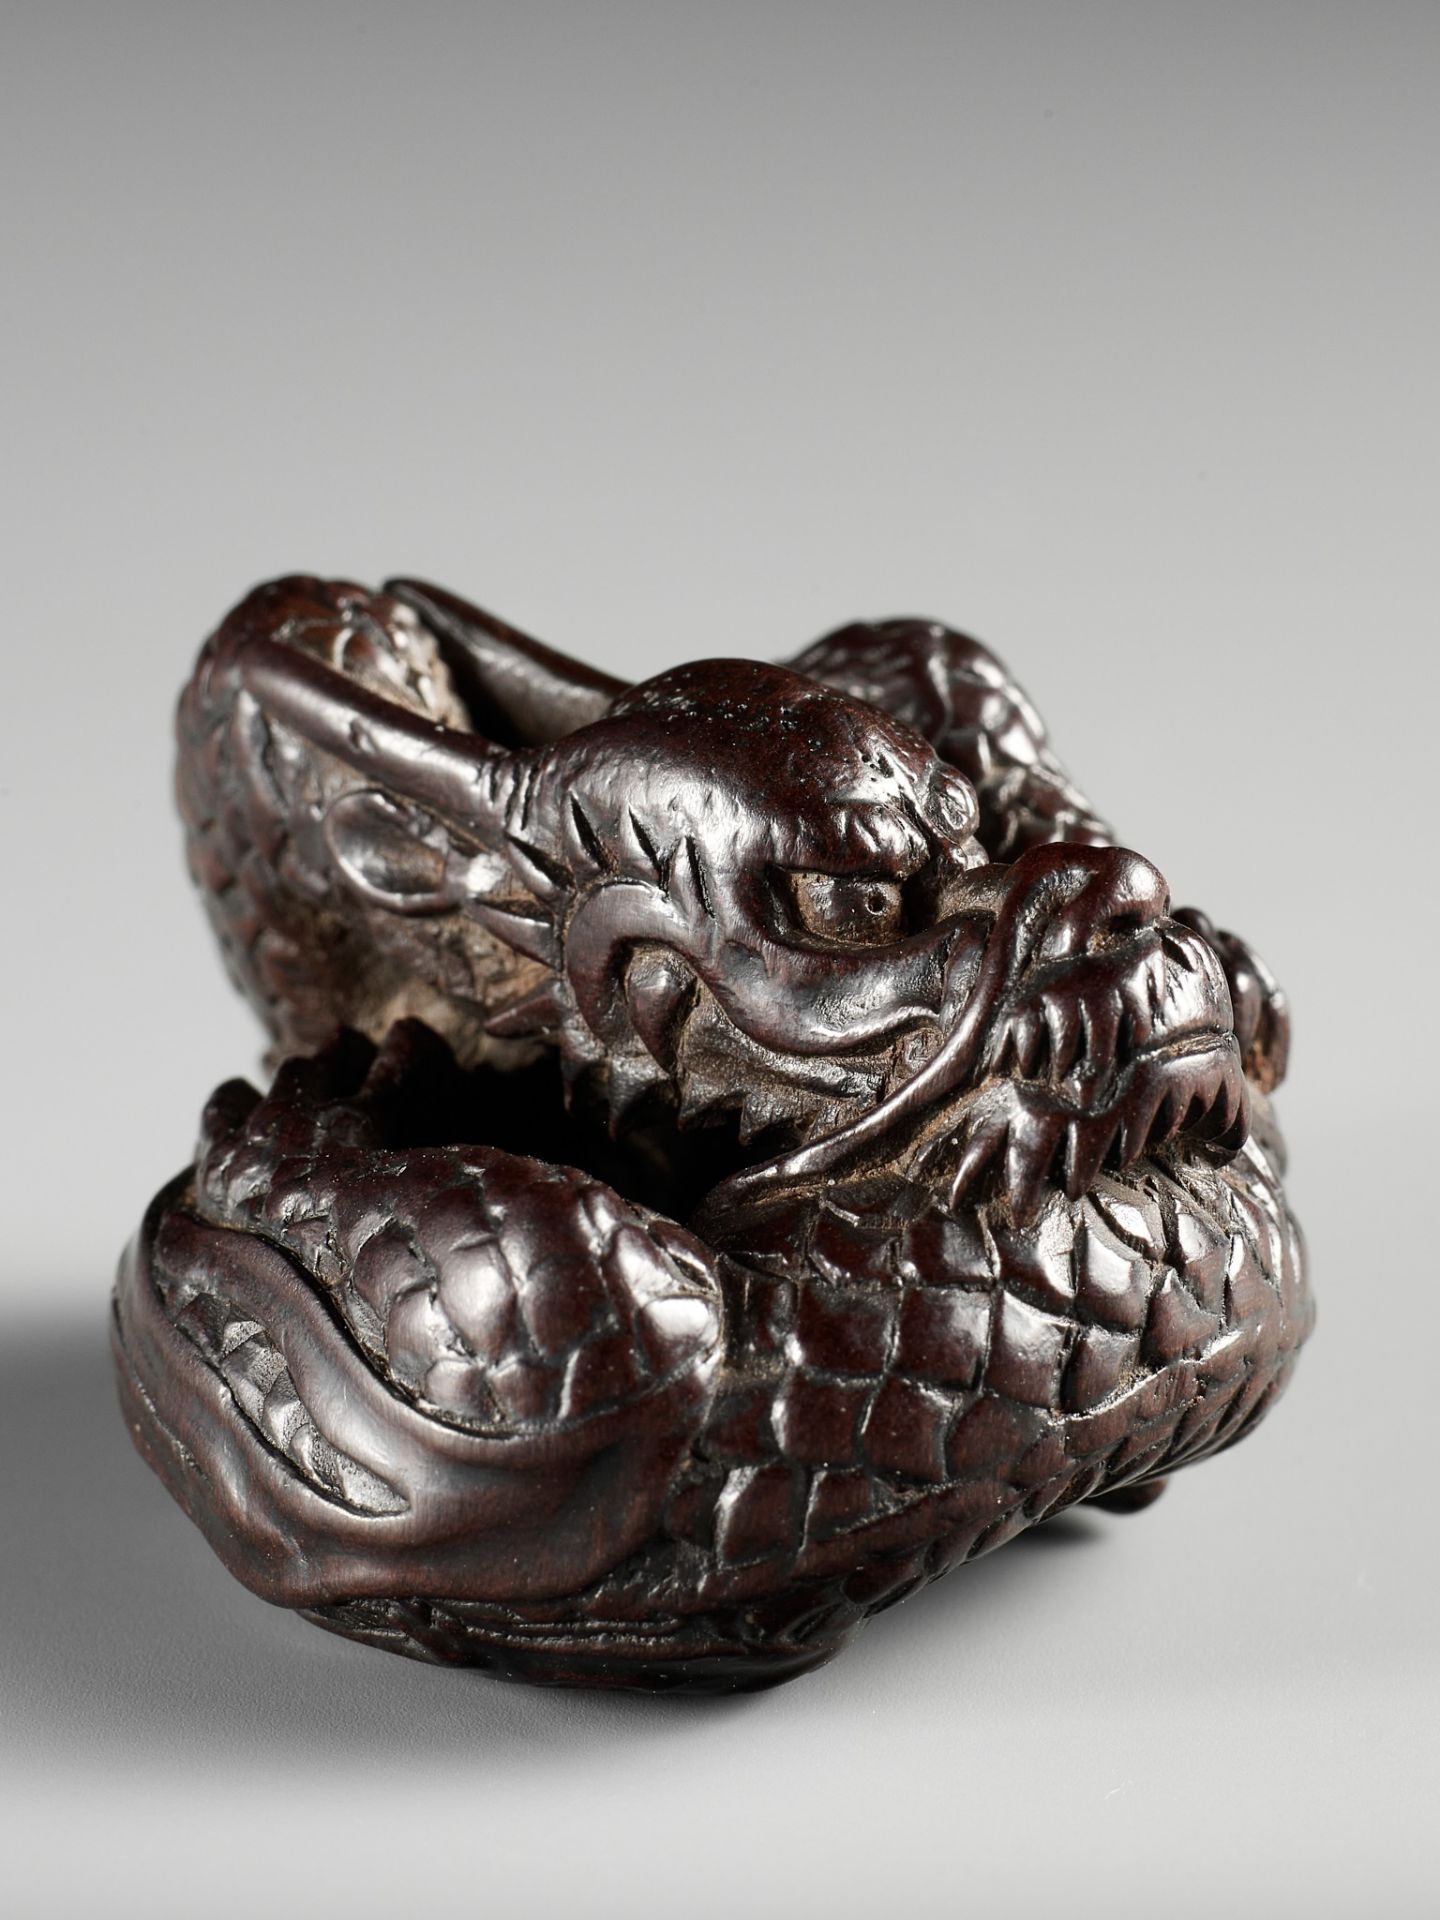 A SUPERB WOOD NETSUKE OF A COILED DRAGON, ATTRIBUTED TO TAMETAKA - Image 11 of 11